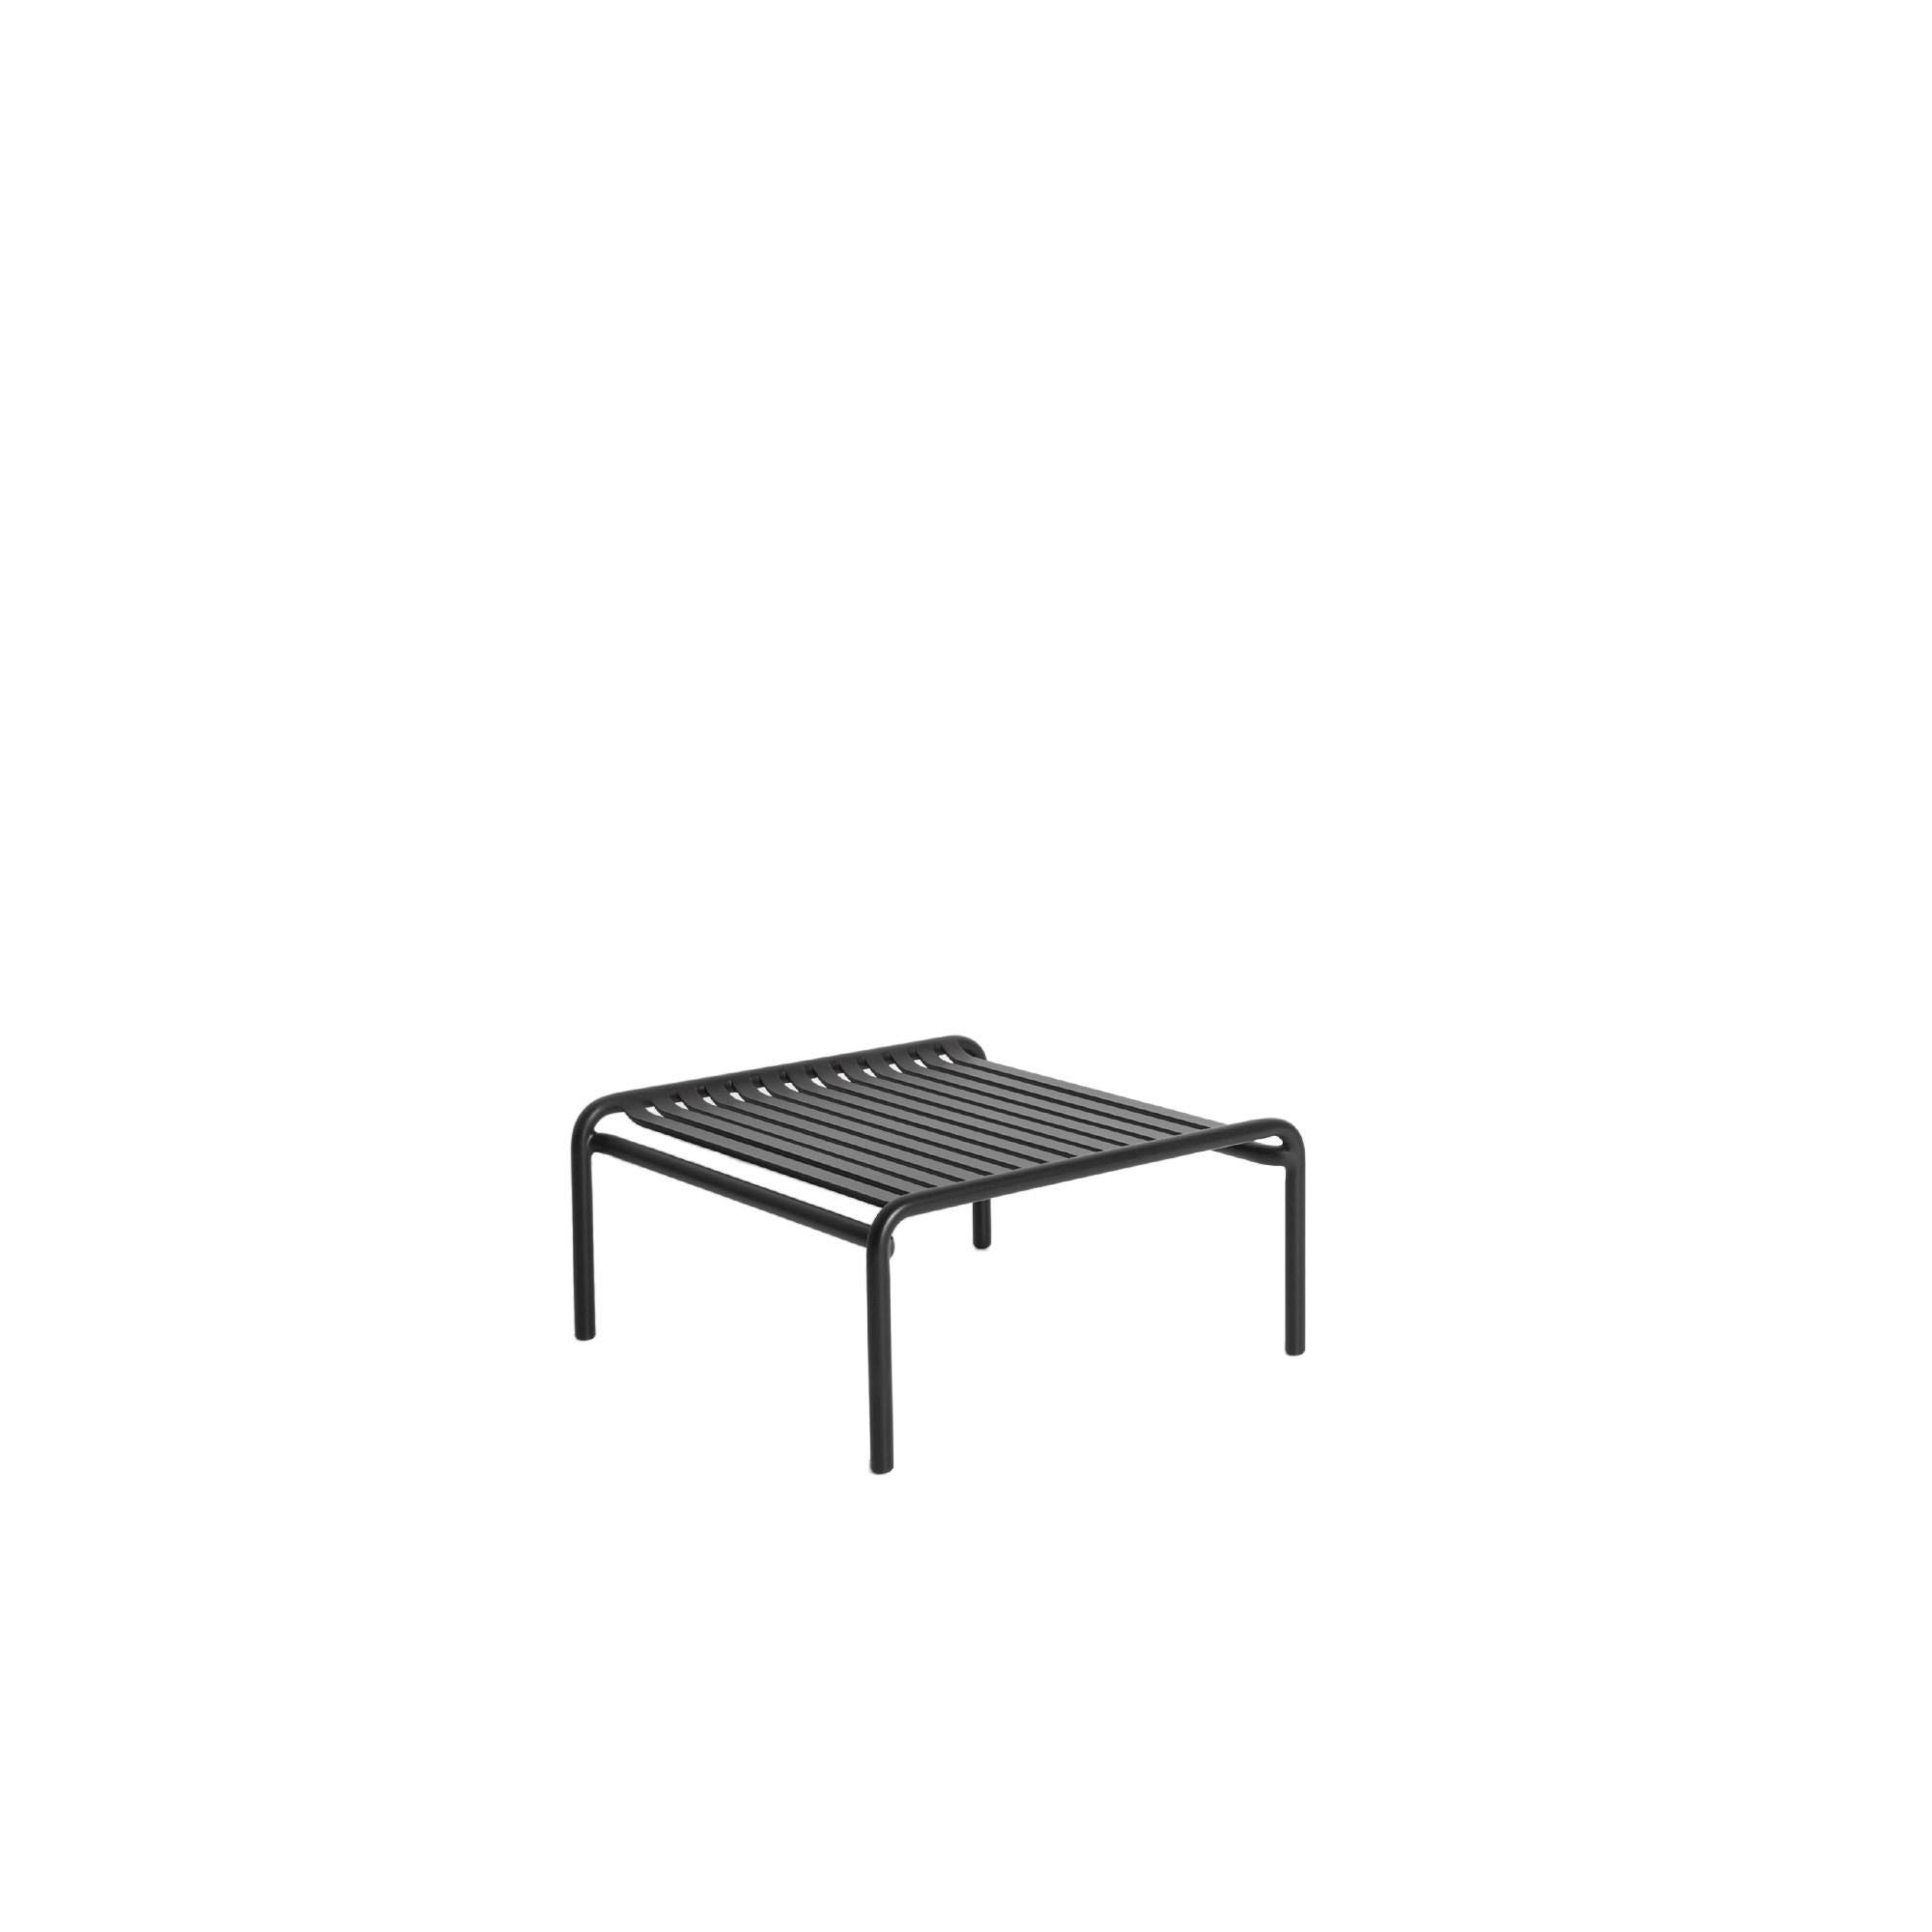 Petite Friture Week-End Coffee Table in Black Aluminium by Studio BrichetZiegler, 2017

The week-end collection is a full range of outdoor furniture, in aluminium grained epoxy paint, matt finish, that includes 18 functions and 8 colours for the